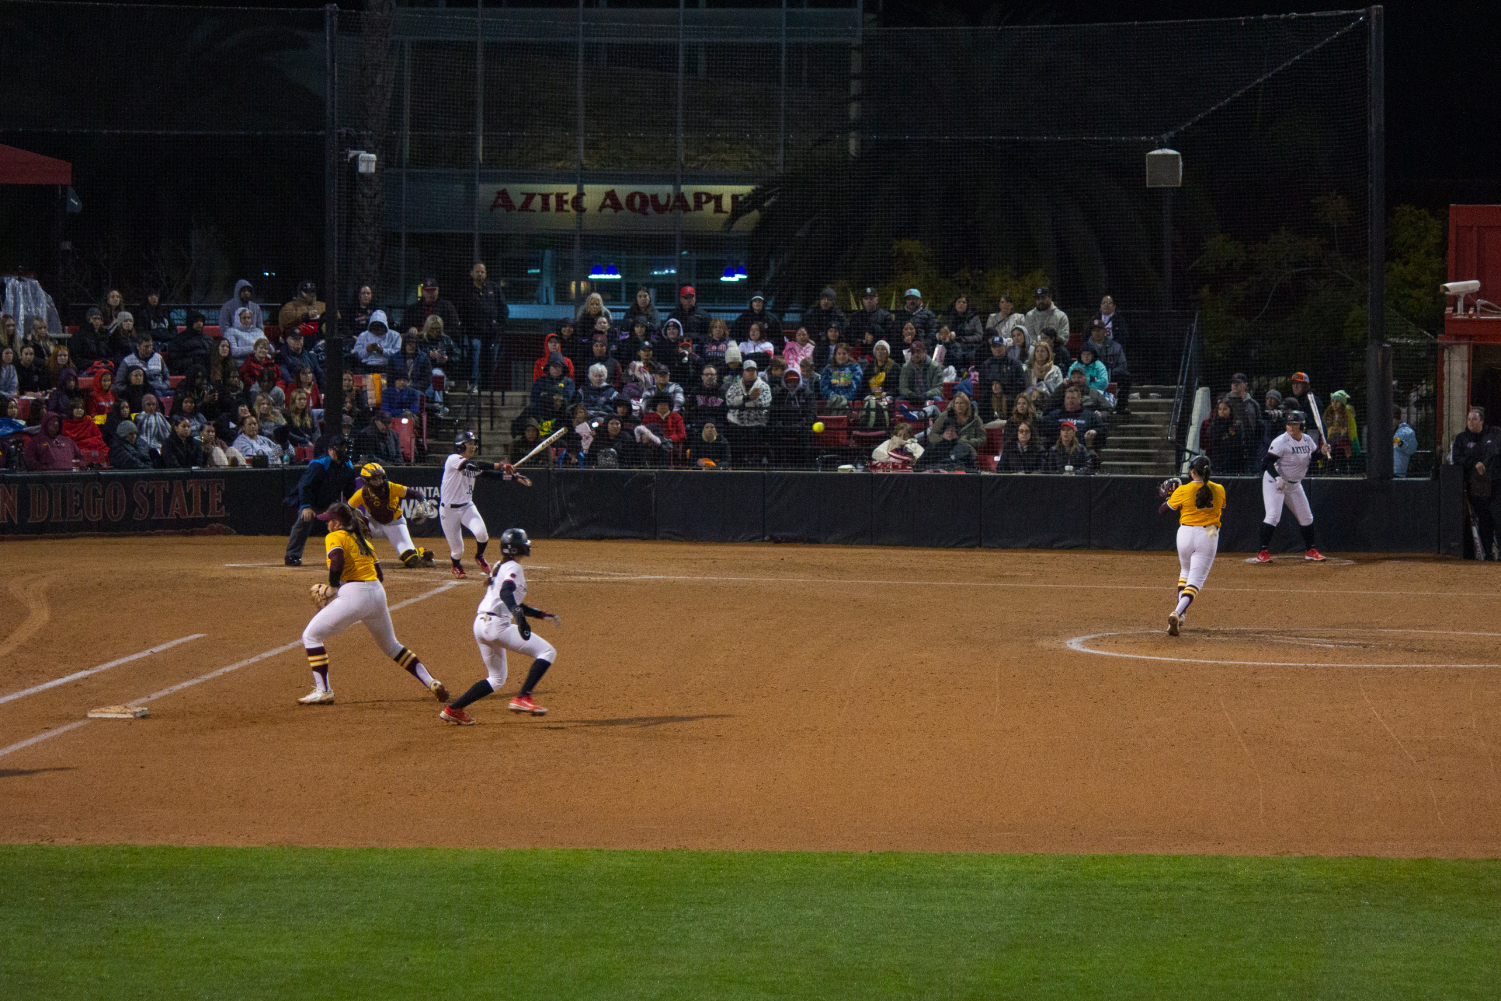 San Diego State infielder Micaela Macario hits the ball earlier this season at the SDSU Softball Stadium. Macario has gone 5 for 10 with a home run, three runs scored and two stolen bases in the Aztecs first three wins at the Mary Nutter Classic.